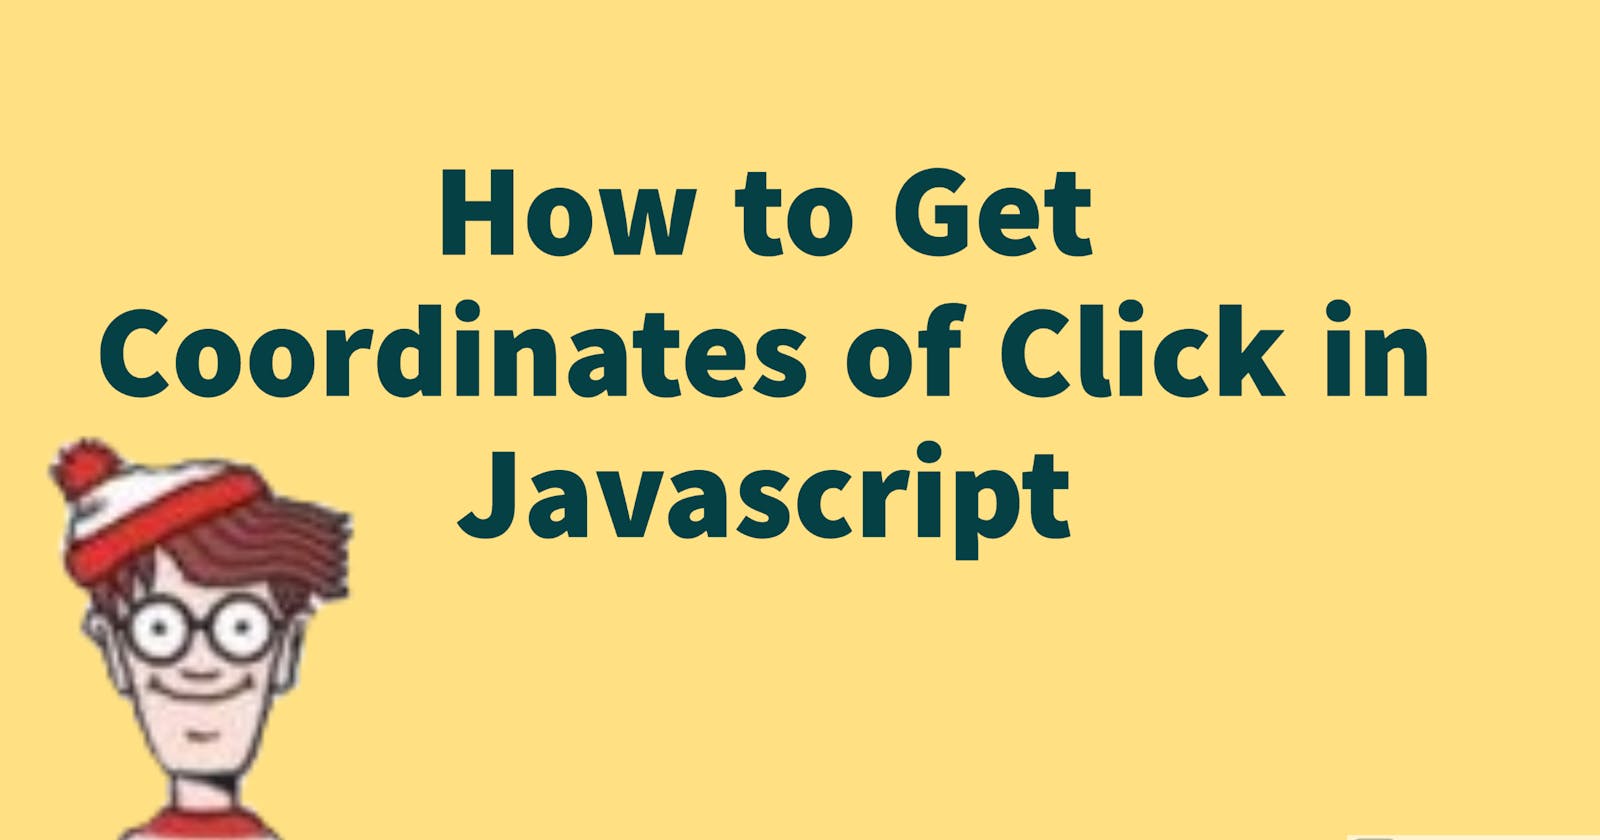 How to Get Coordinates of Click in Javascript